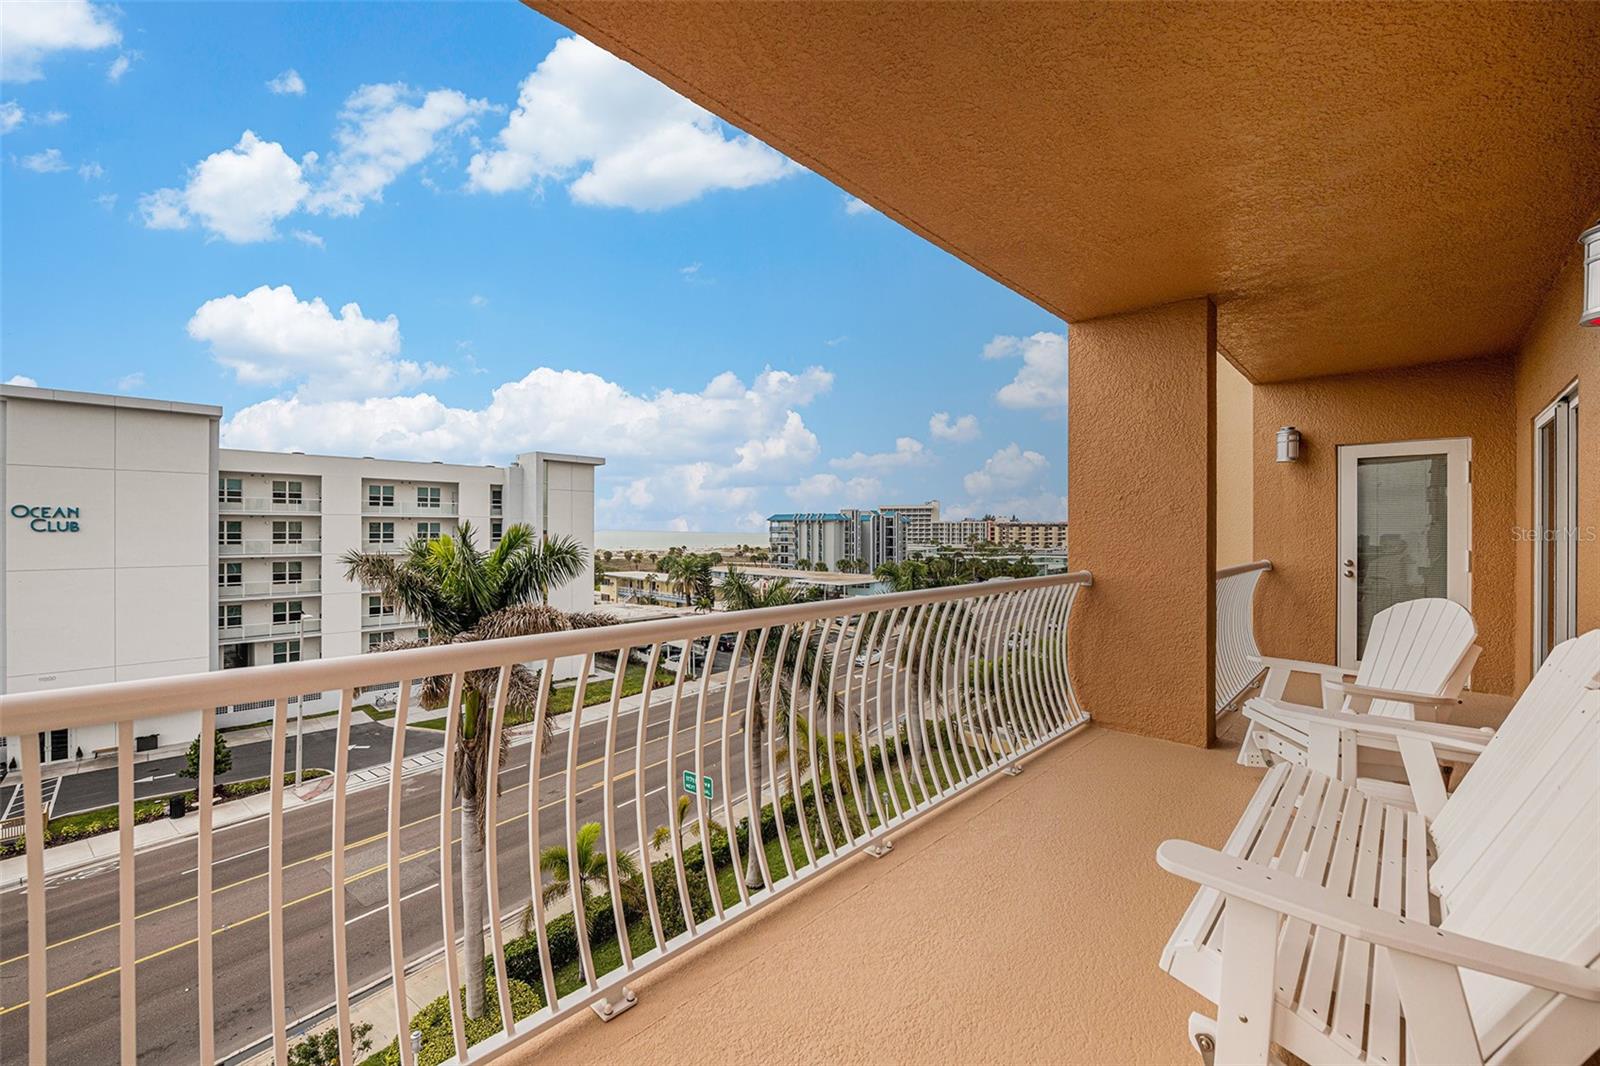 Enjoy Florida sunsets from the shared patio for Bedroom #2 and Bedroom #3.  Partial views of the beach are easily seen.